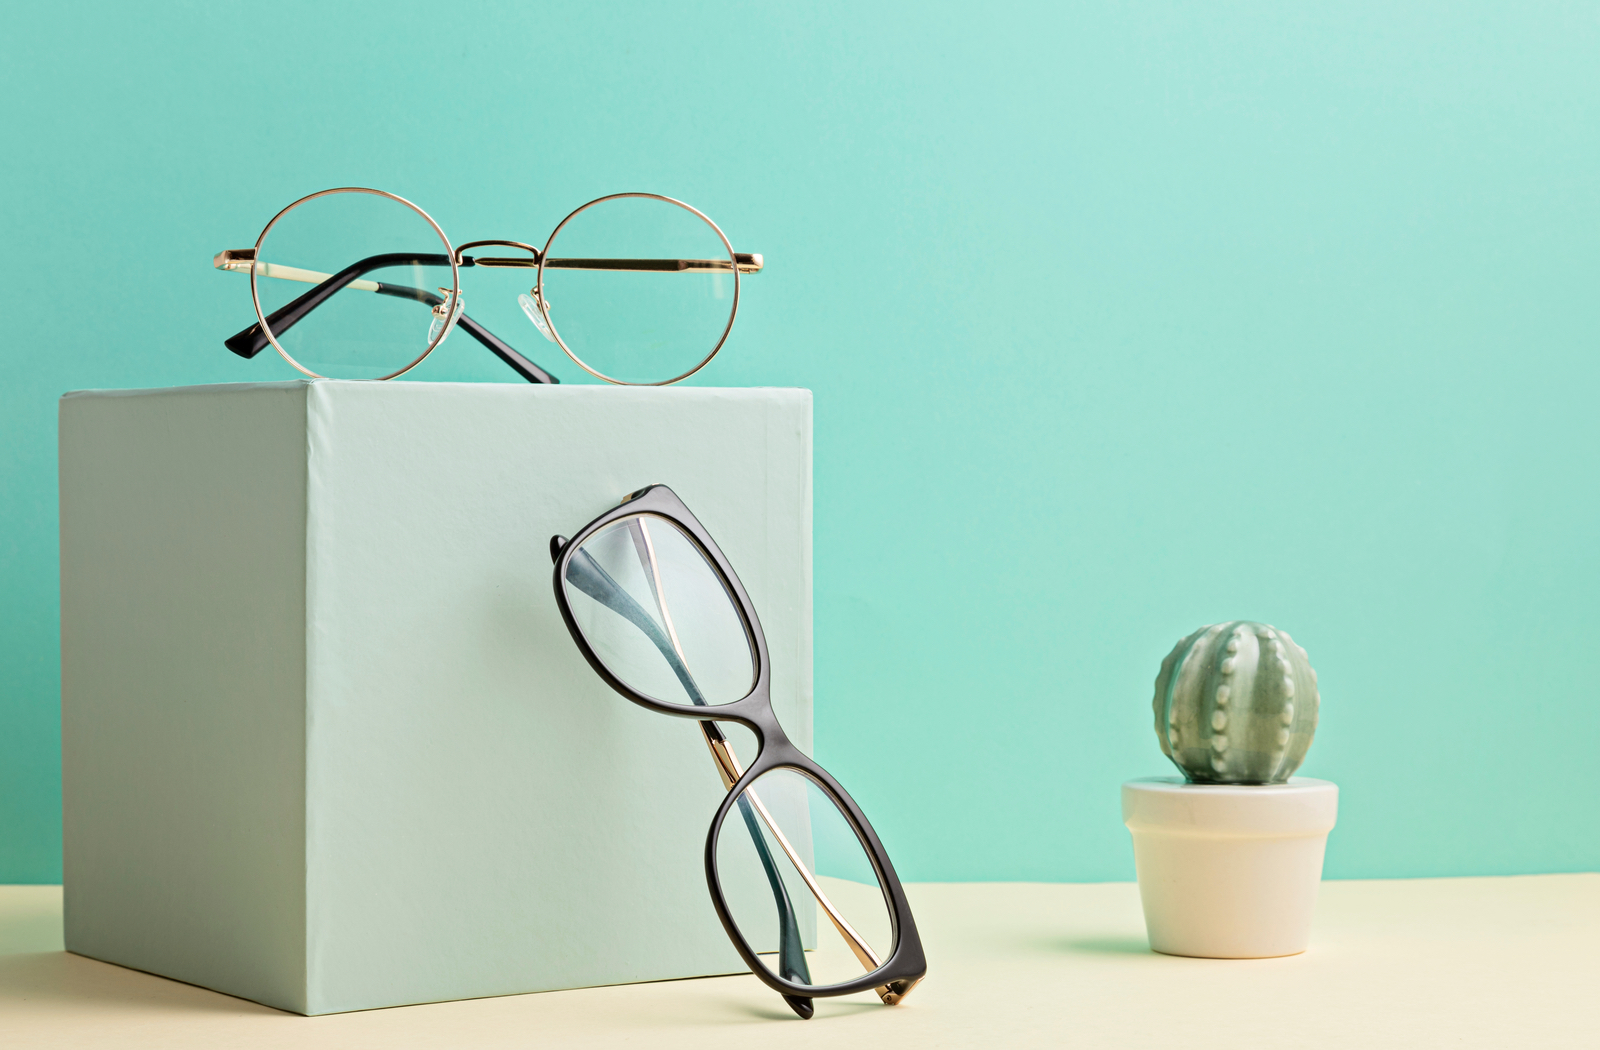 Two pairs of glasses lay on a light green box next to a light green background.